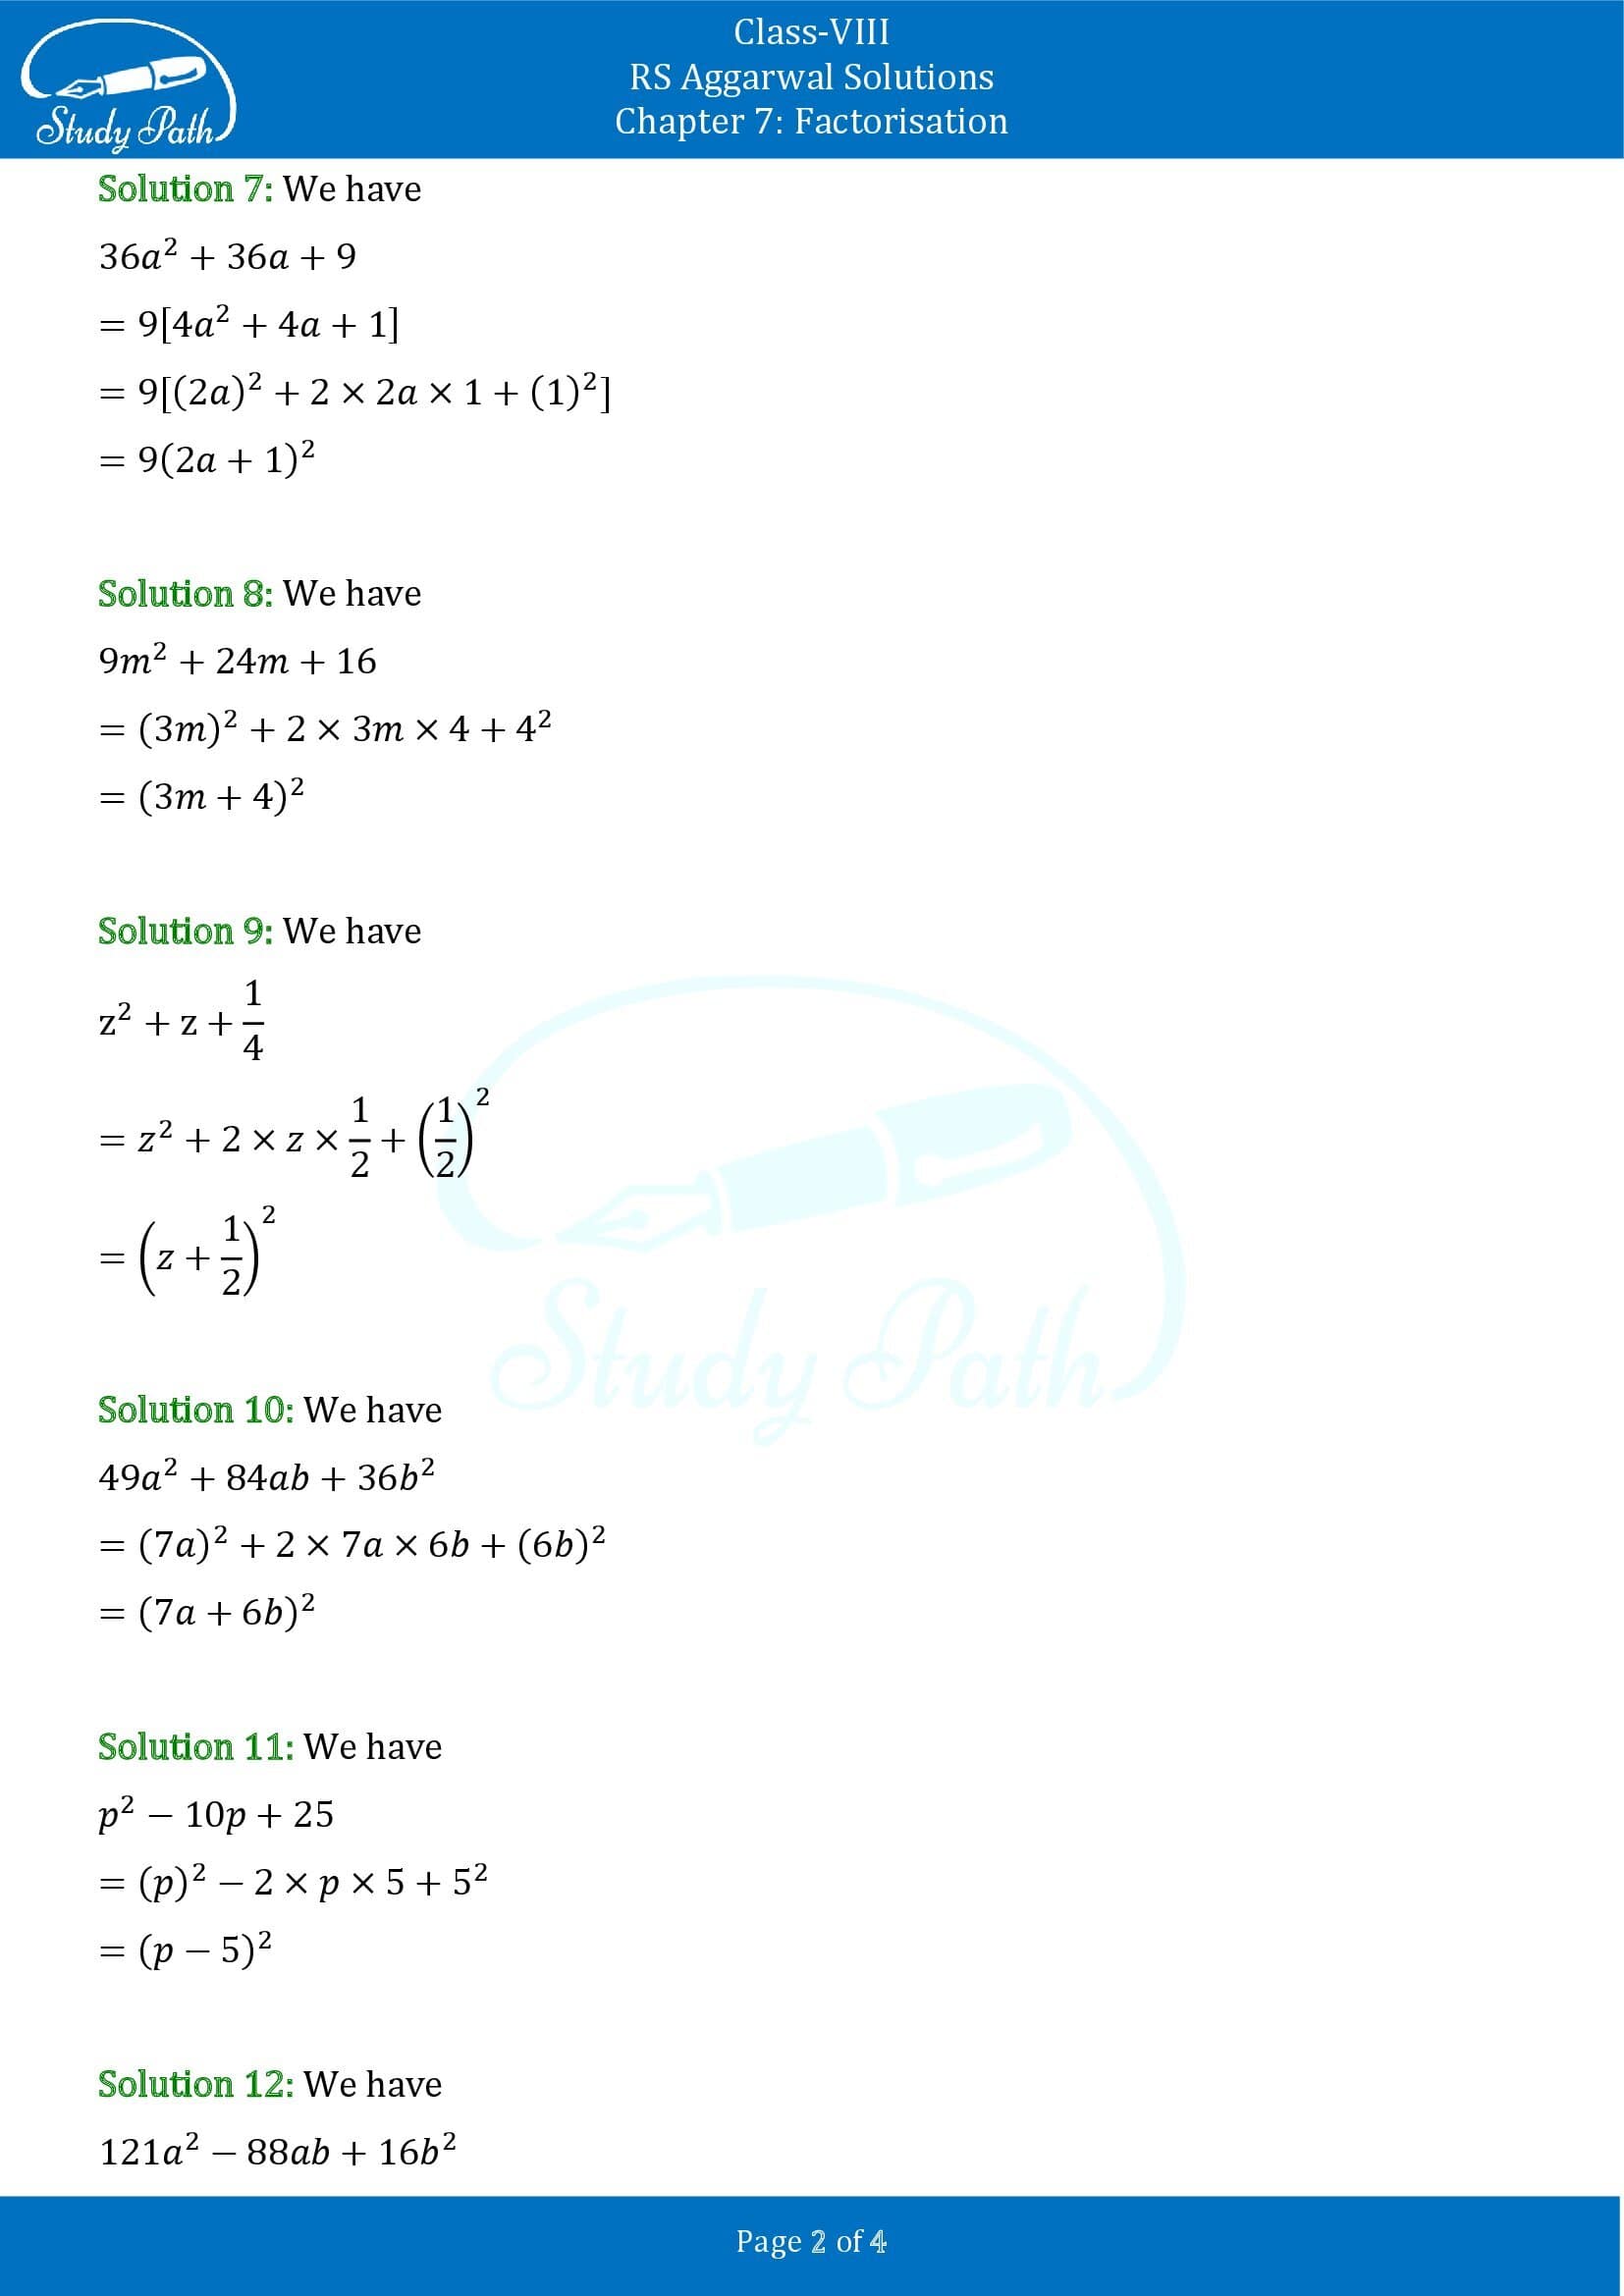 RS Aggarwal Solutions Class 8 Chapter 7 Factorisation Exercise 7C 00002